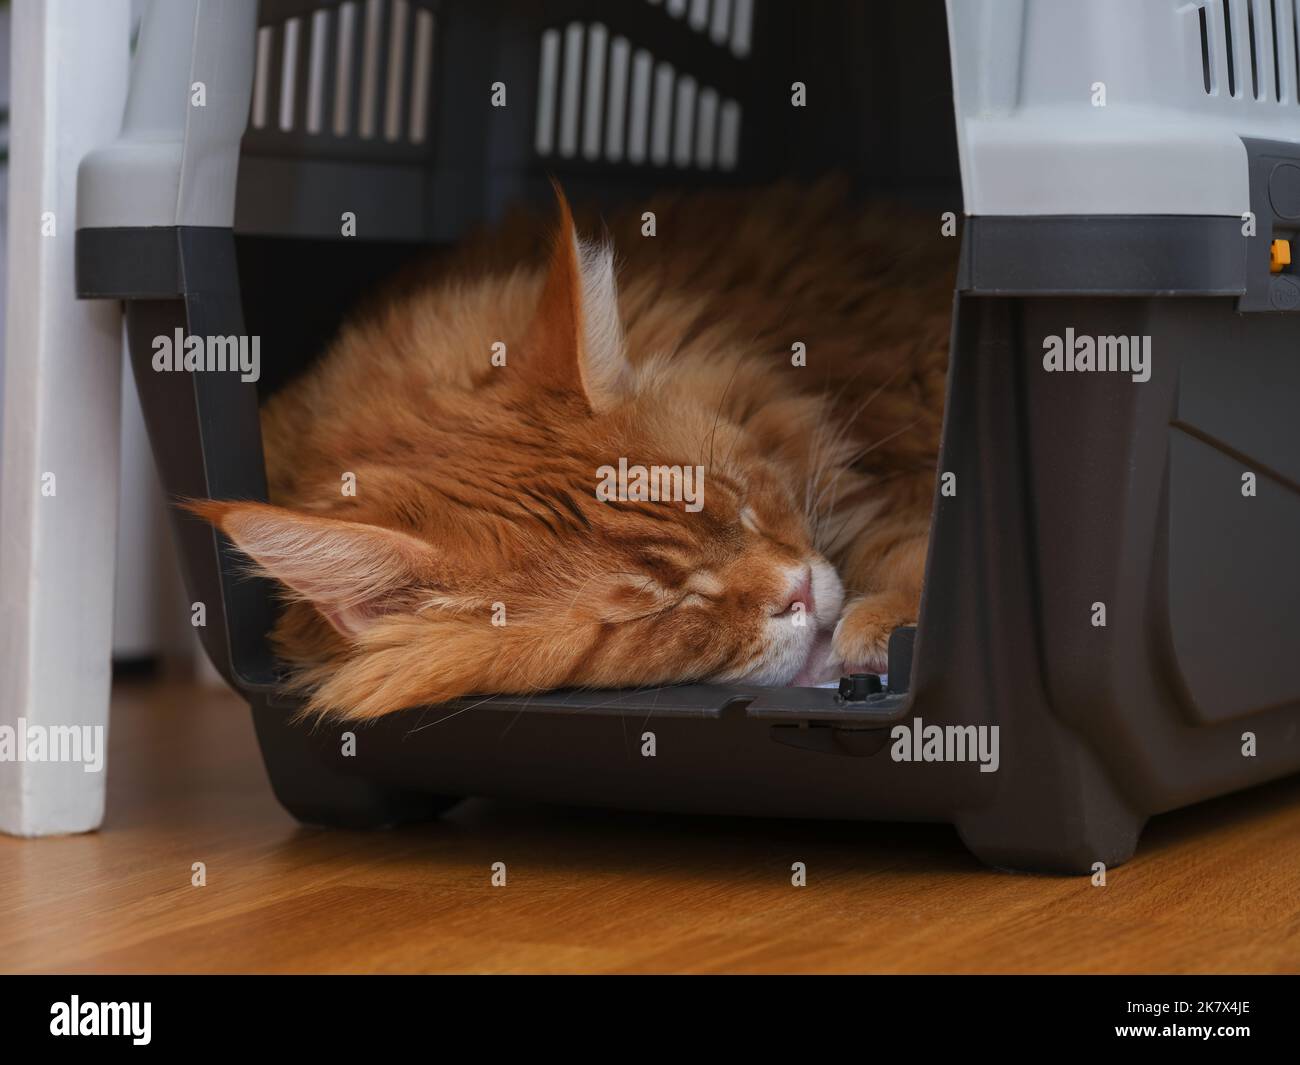 A red Maine coon cat sleeping in a cat carrier. Close up. Stock Photo